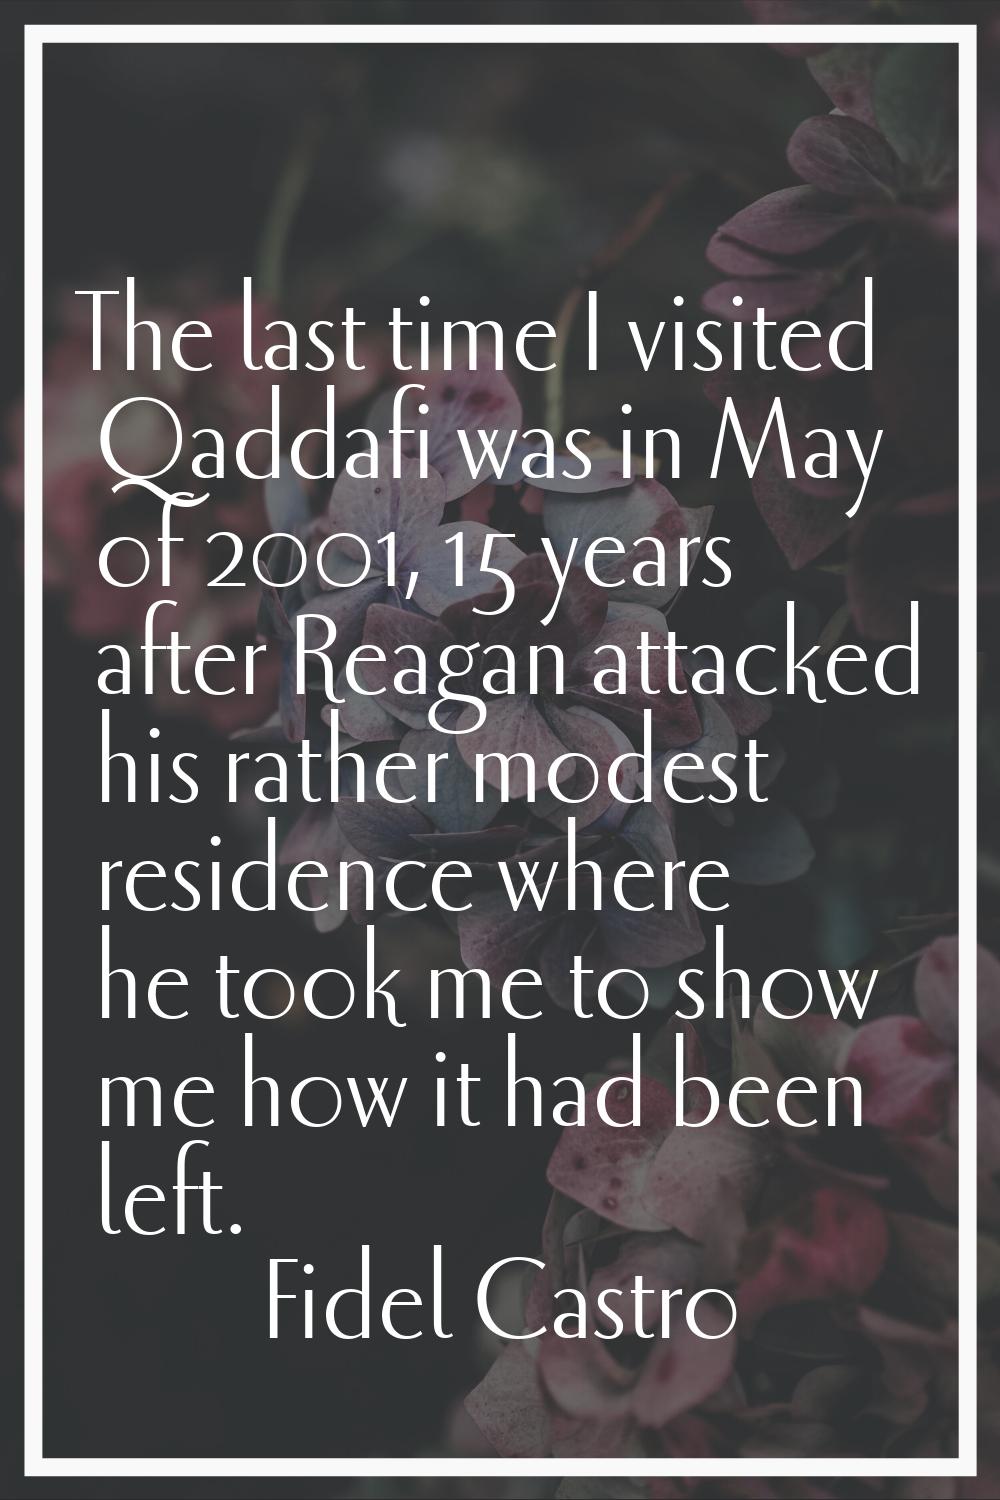 The last time I visited Qaddafi was in May of 2001, 15 years after Reagan attacked his rather modes